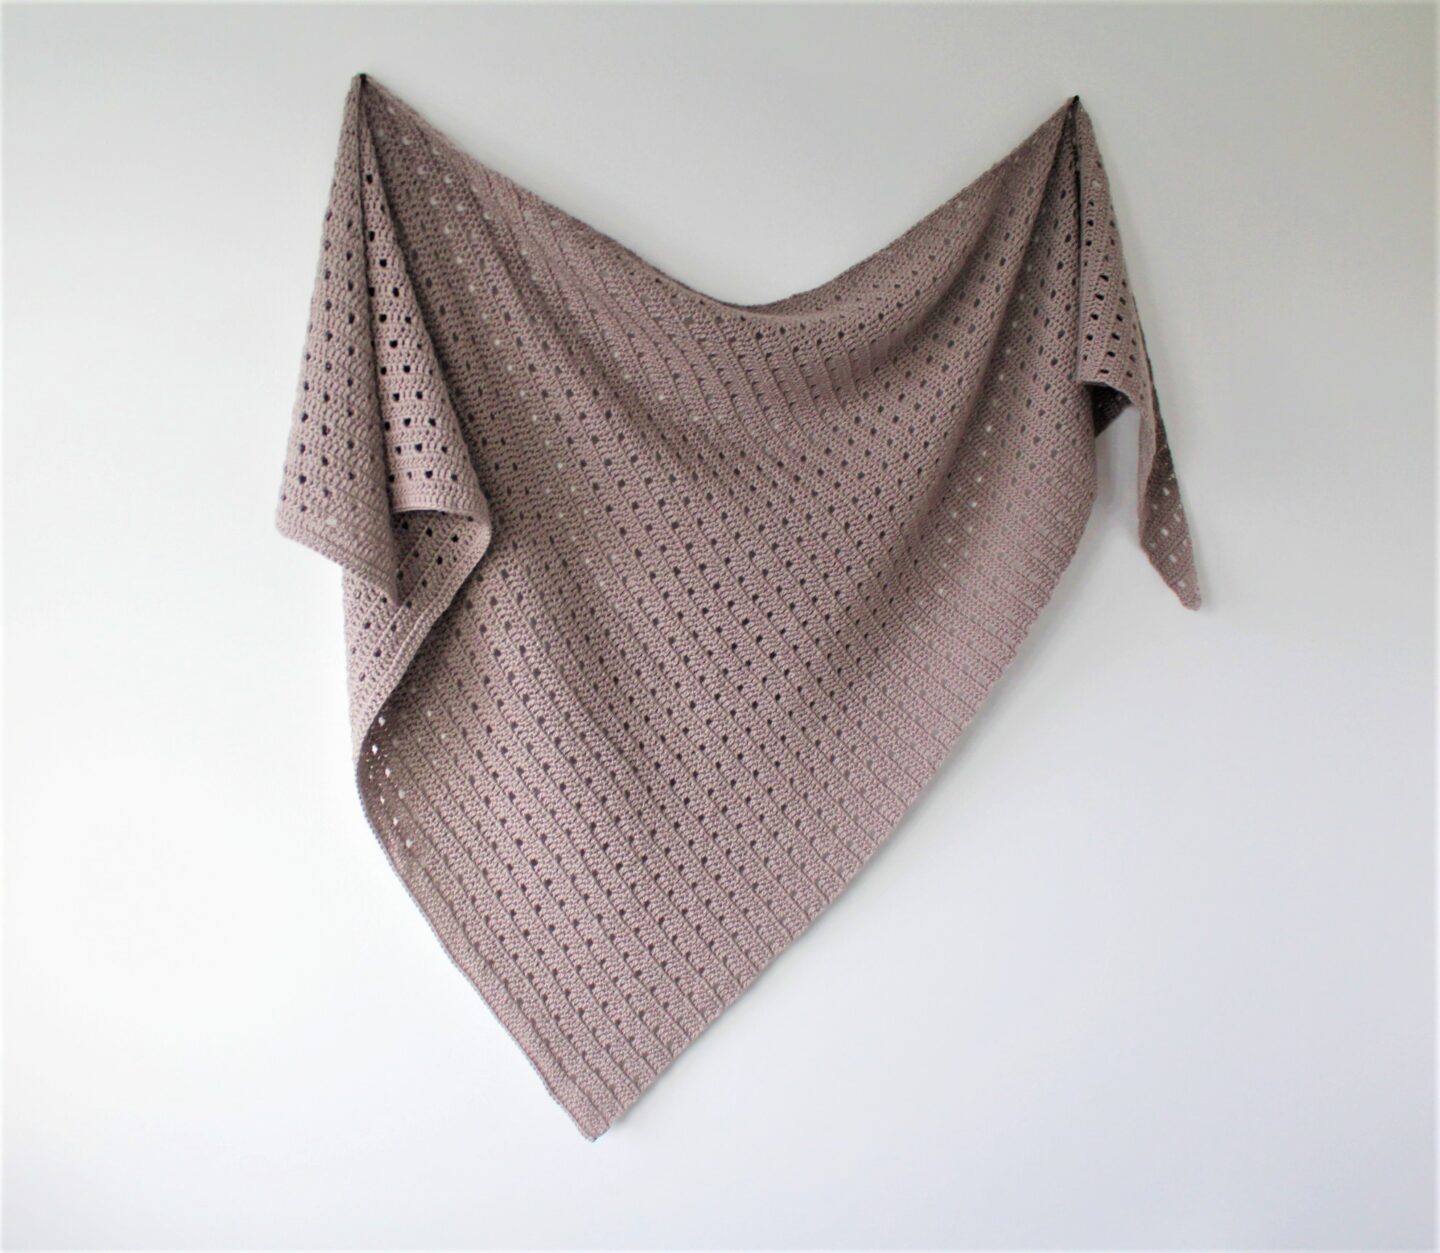 Side view of the Cara shawl